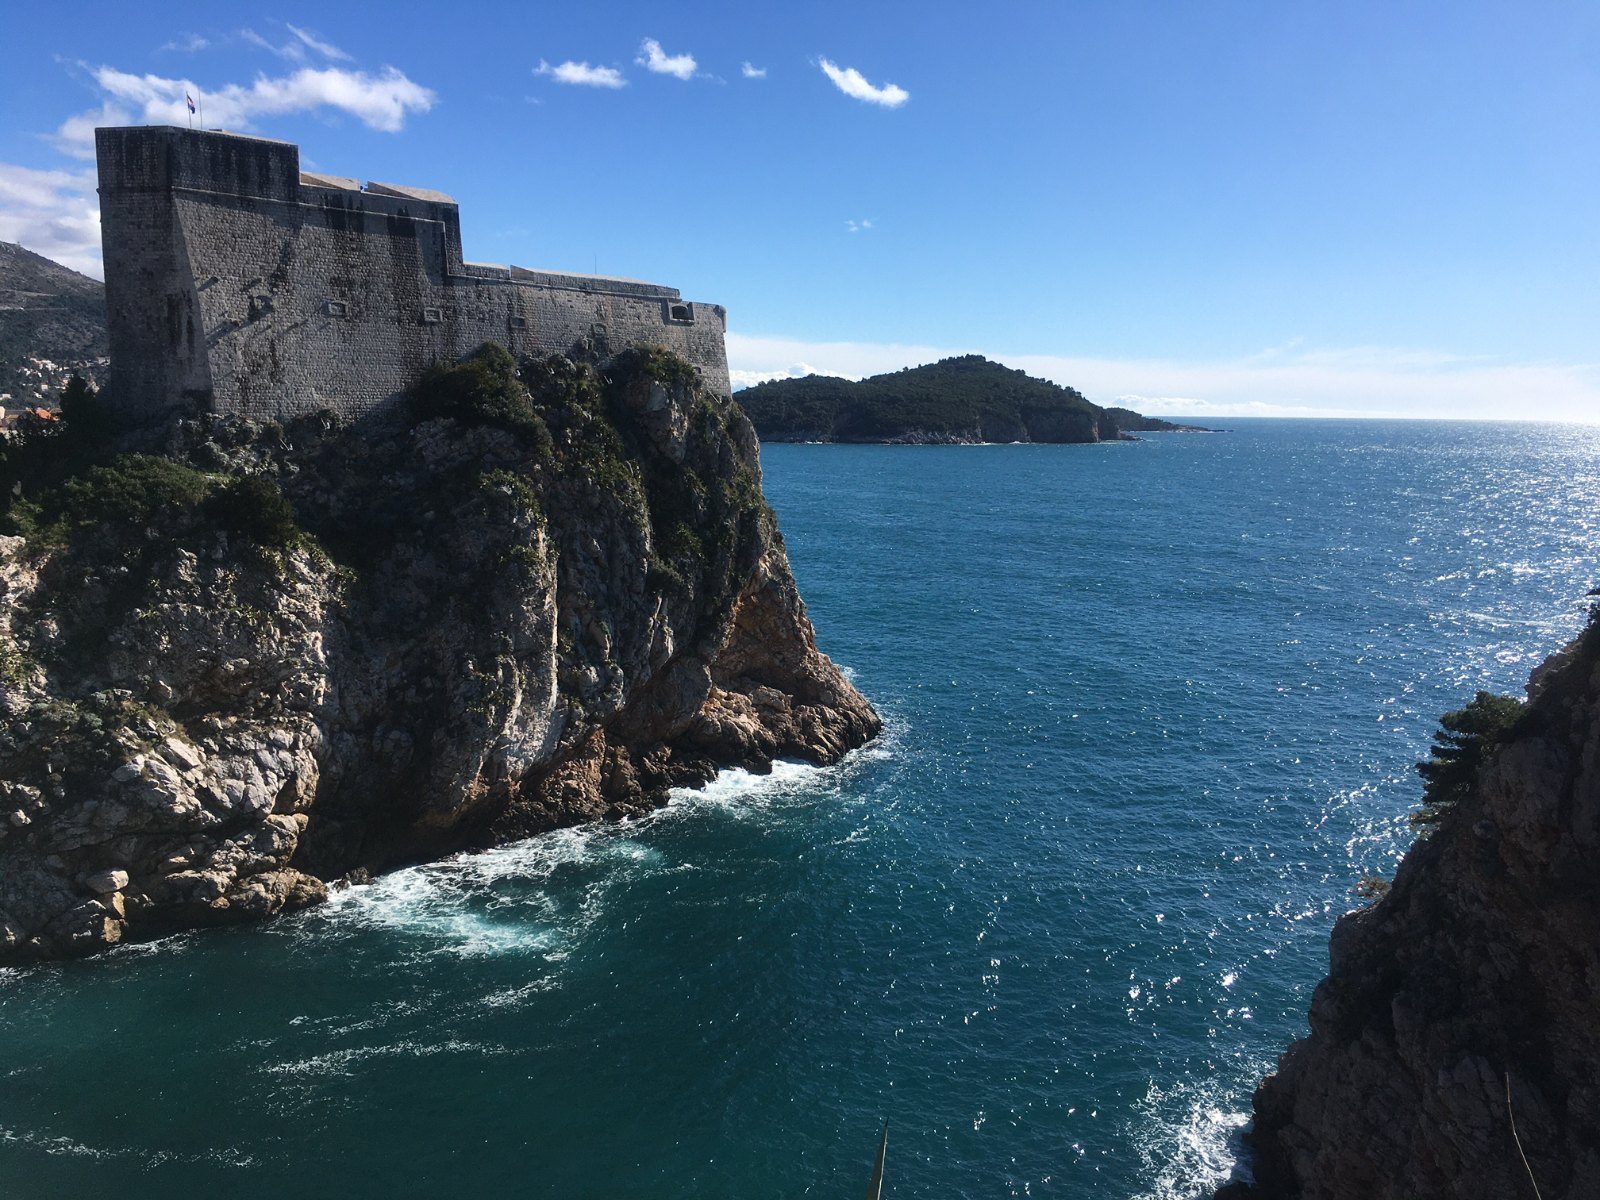 The Most Mysterious Island of Dubrovnik